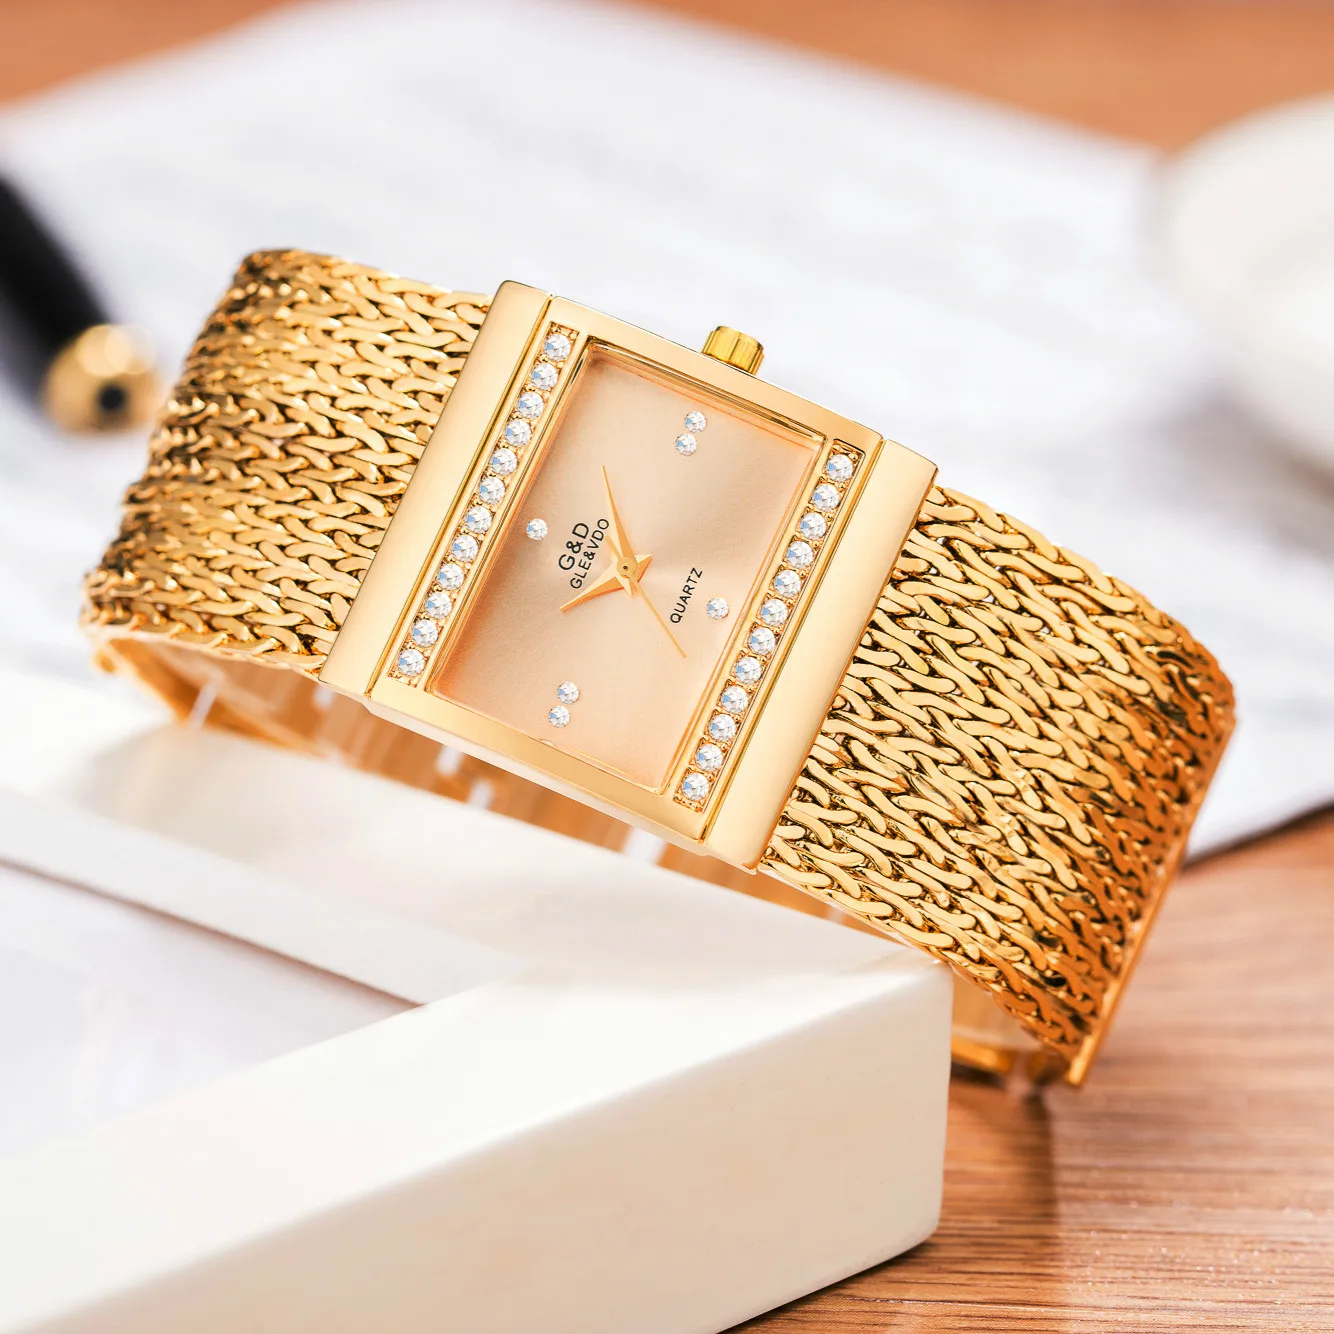 

Horloges Vrouwen Woman Famous Brand Dress Square Design Female Wristwatch Gold Stainless Steel Clock Montre Femme 2021